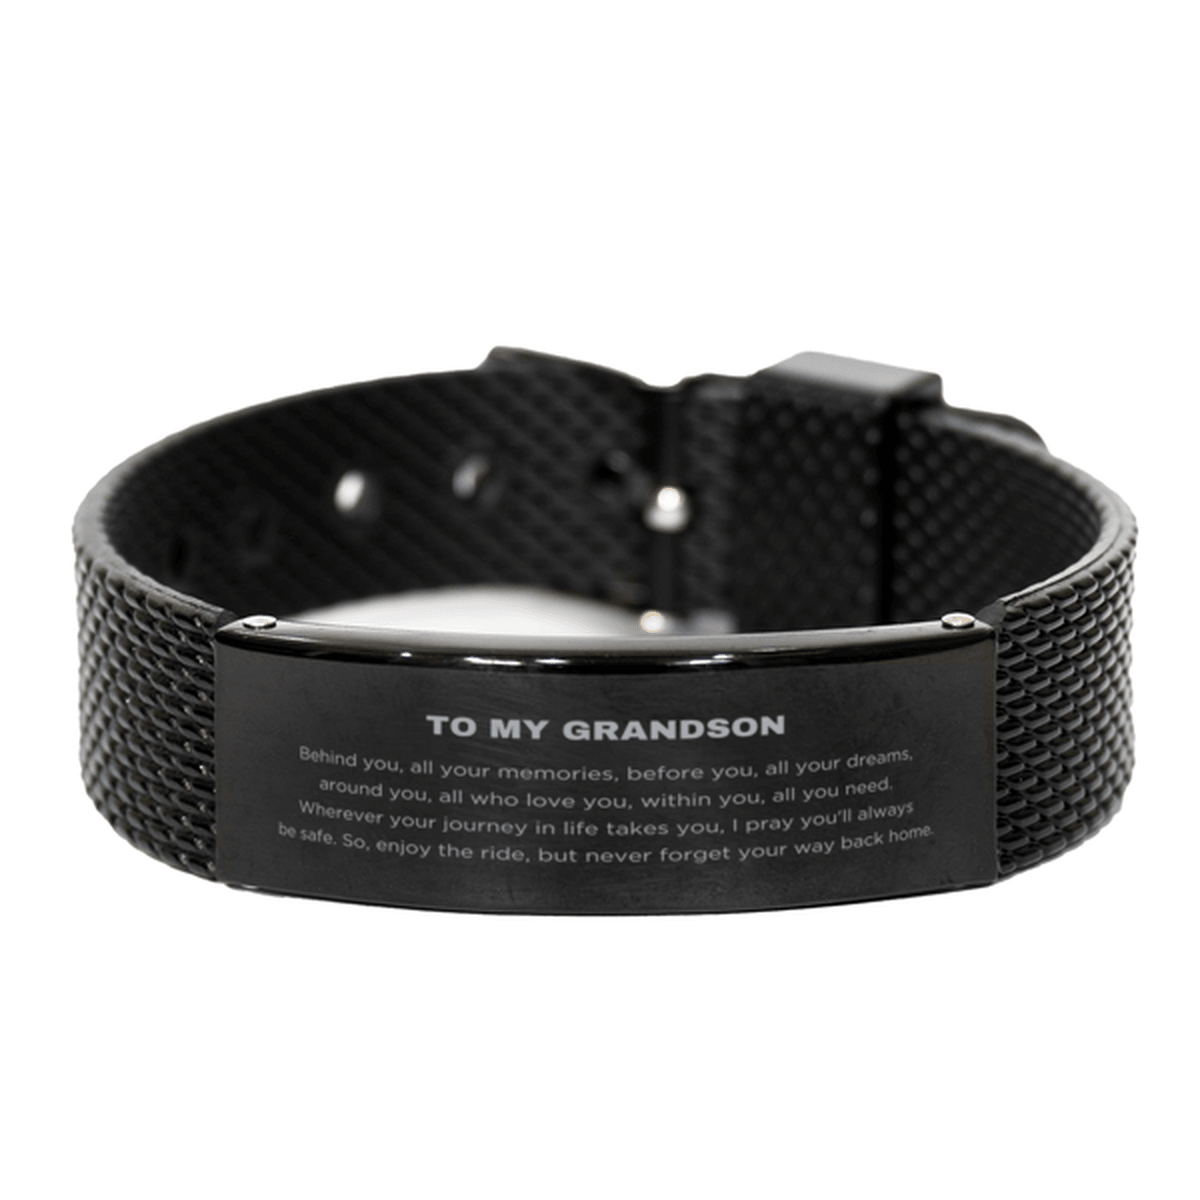 Inspirational Grandson Engraved Black Shark Mesh Bracelet - Behind you, all your Memories, Before you, all your Dreams - Birthday, Christmas Holiday Gifts - Mallard Moon Gift Shop